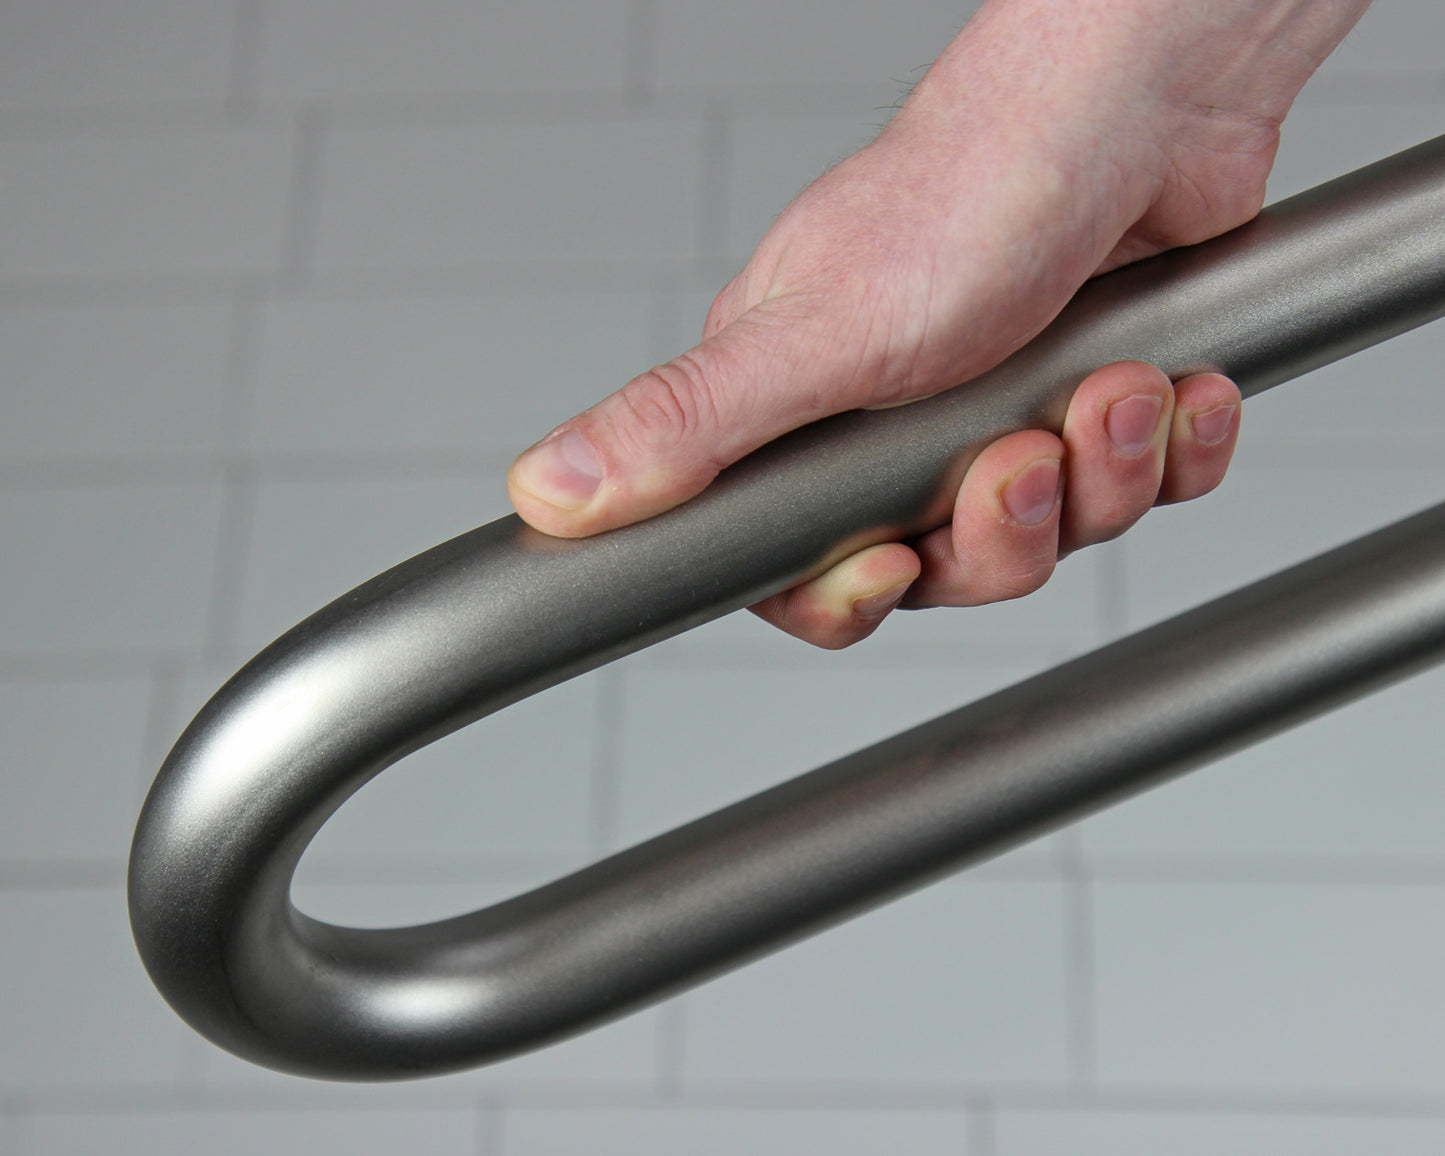 Frost Swing Up Grab Bar In Use